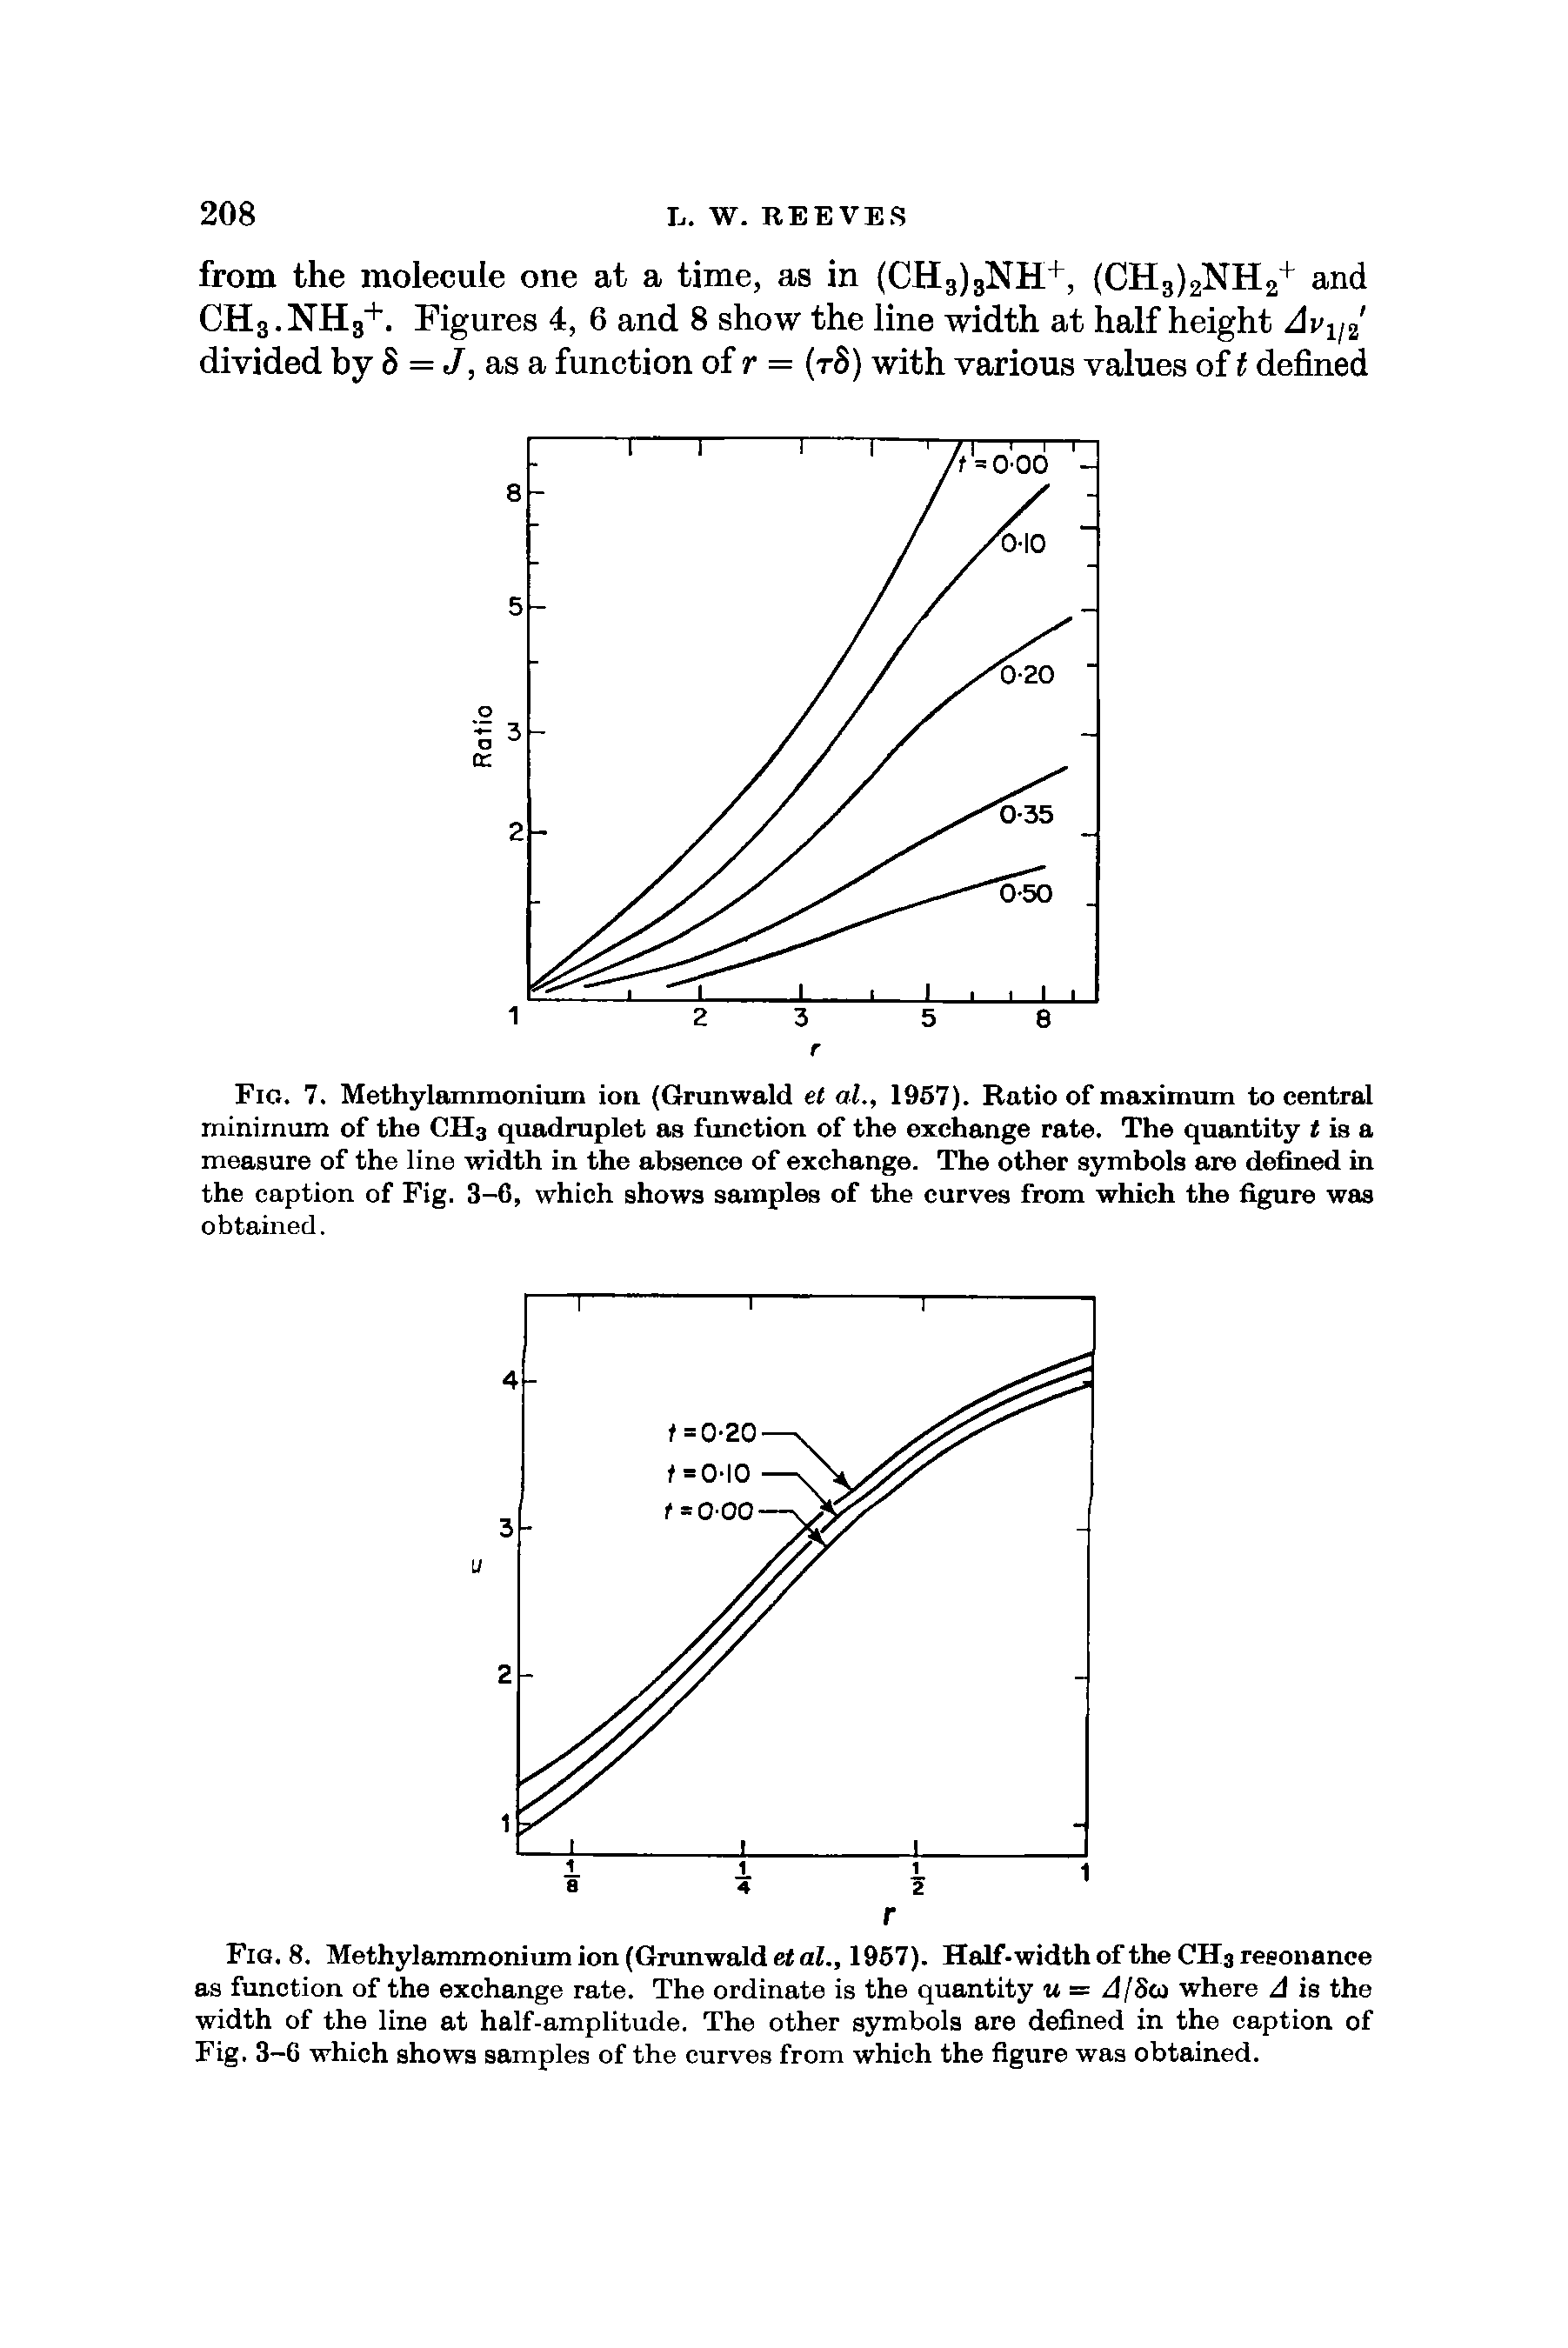 Fig. 8. Methylammonium ion (Grunwald et al., 1957). Half-width of the CH3 reeonance as function of the exchange rate. The ordinate is the quantity u = A/ Sco where A is the width of the line at half-amplitude. The other symbols are defined in the caption of Fig. 3-6 which shows samples of the curves from which the figure was obtained.